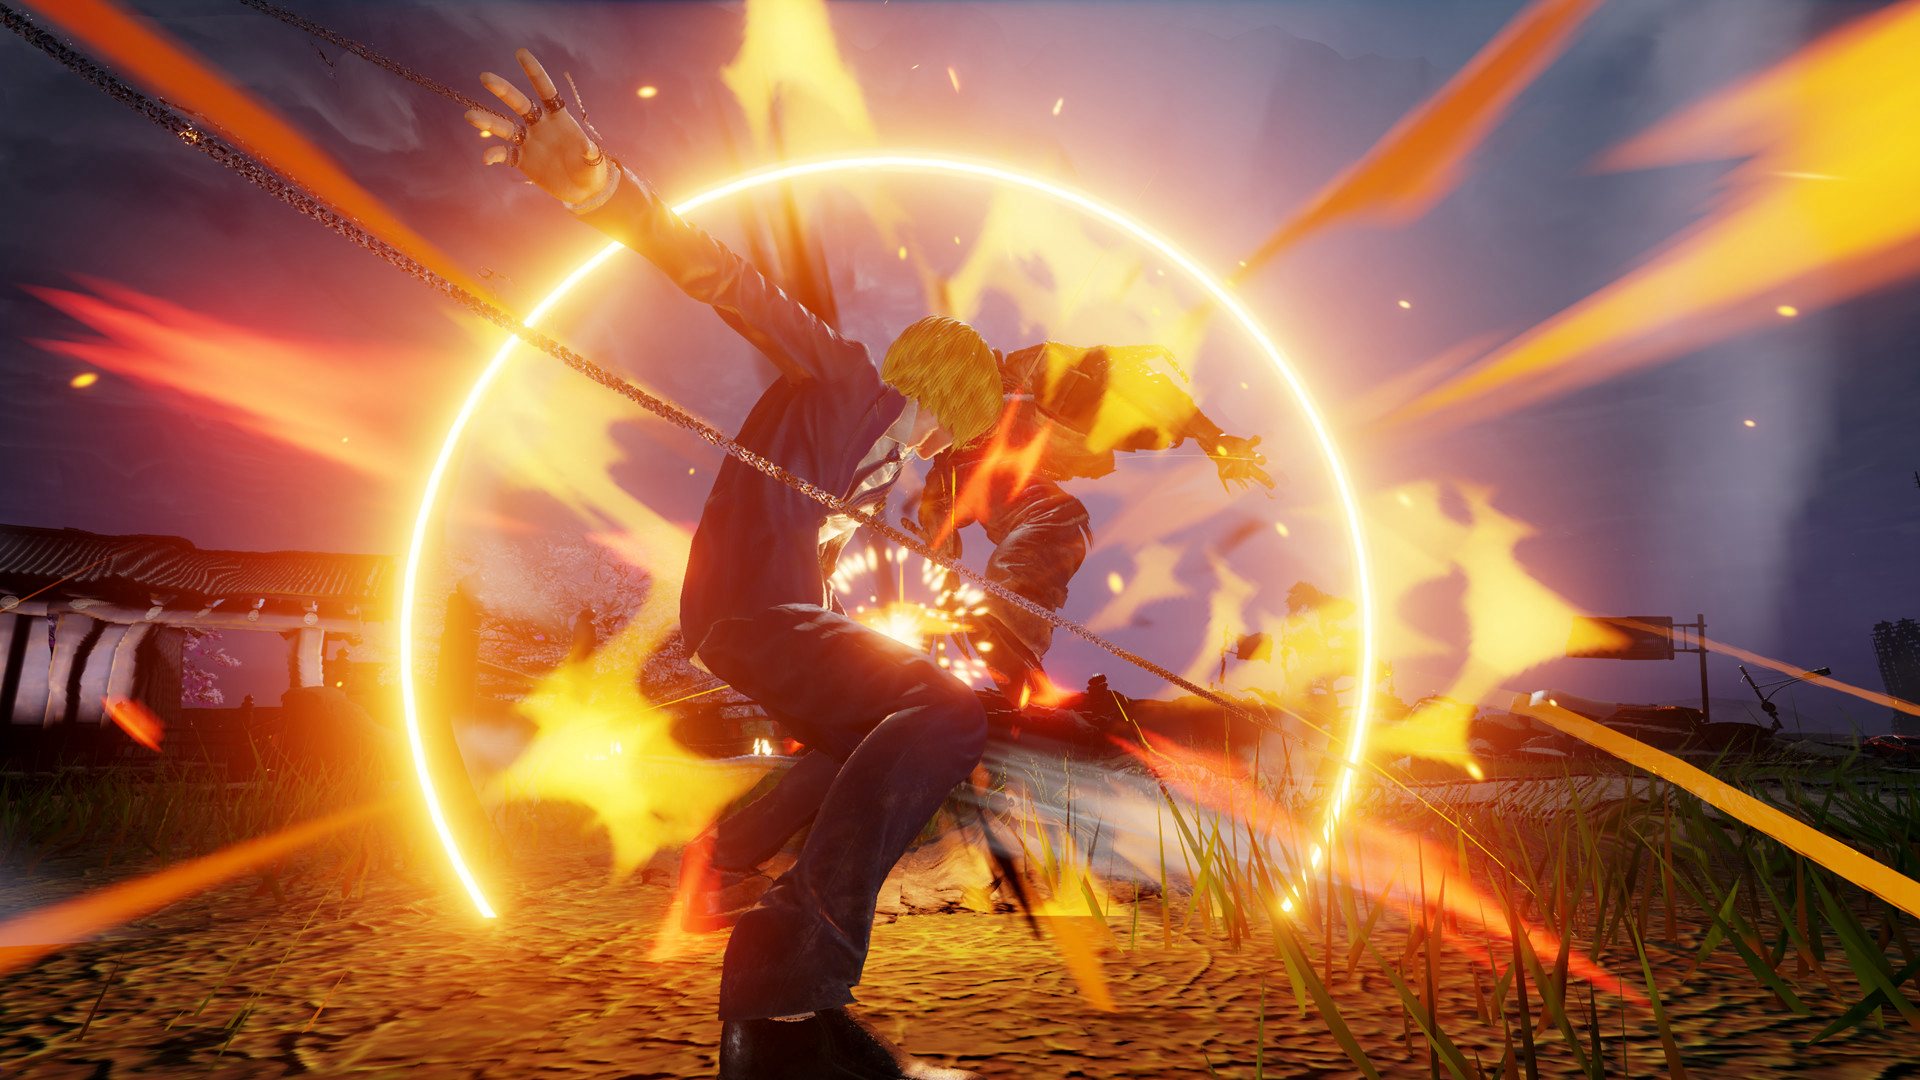 JUMP FORCE Deluxe Edition EU Steam CD Key 190.95 usd